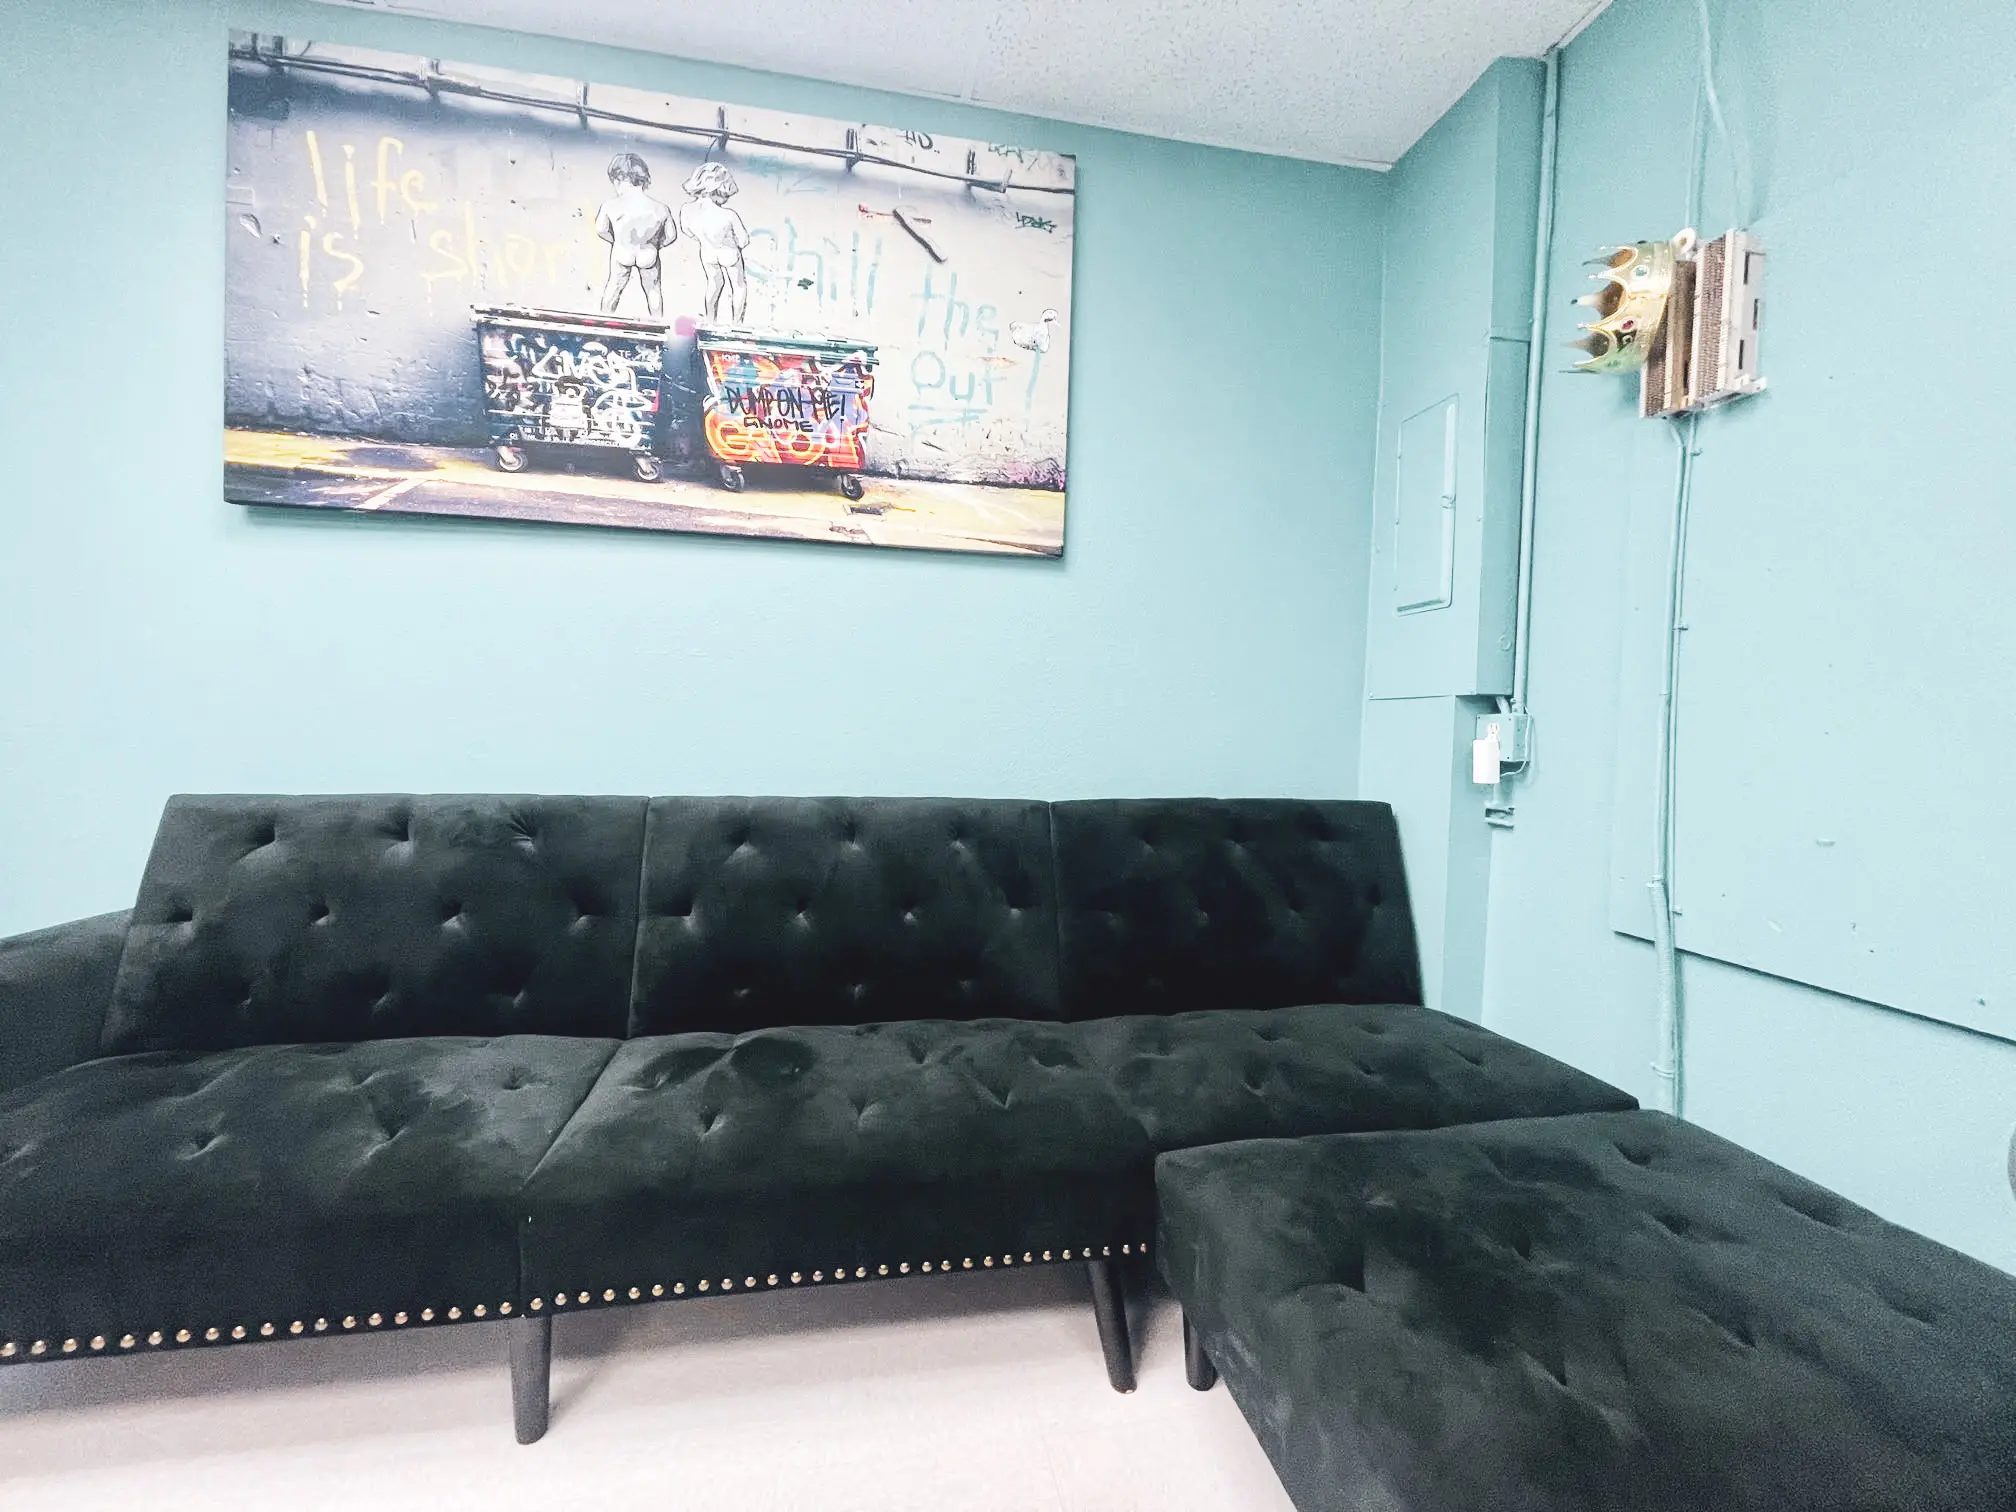 Mental Health Outpatient living room. There are 2 couches and artwork hanging on the wall